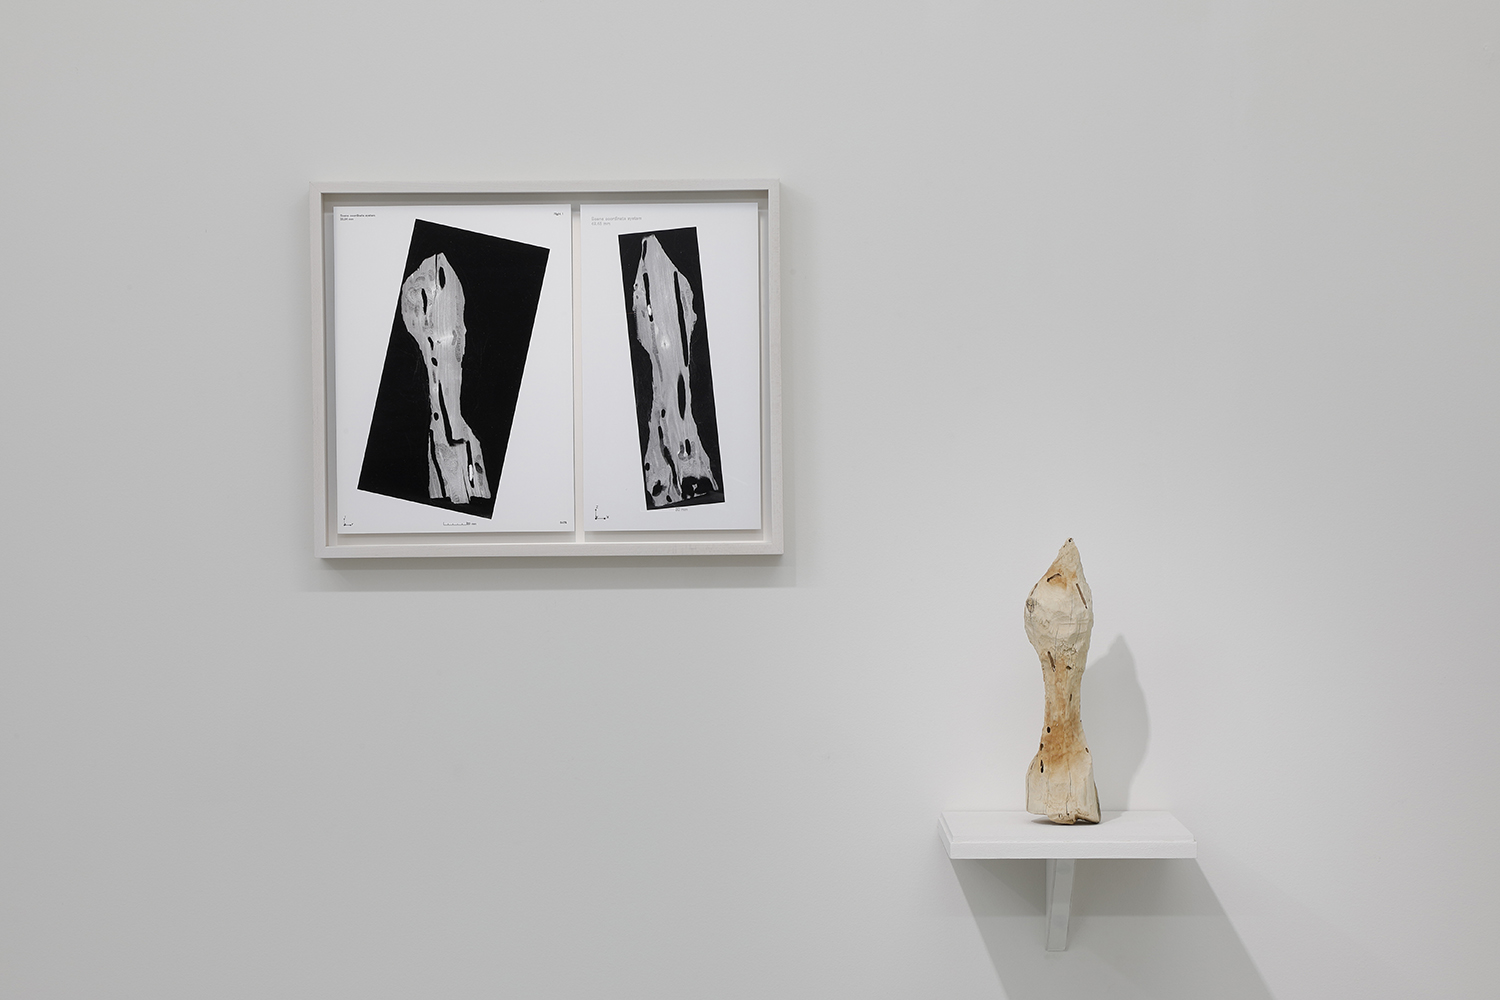 Installation view of “How to Carve a Sculpture”